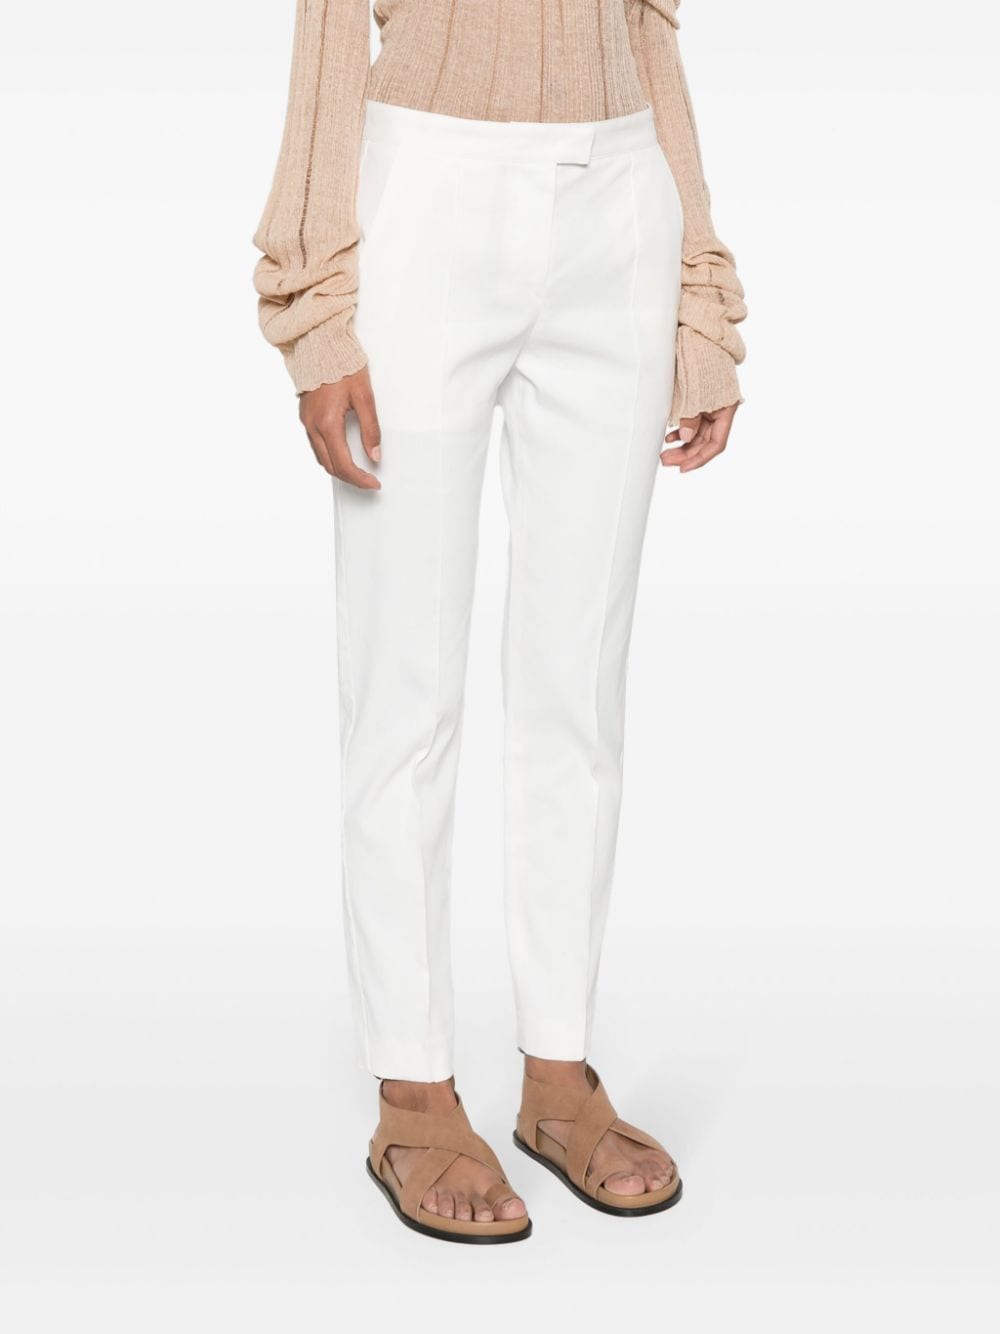 White Hemp-Blend Pants for Women in SS24 Collection by Isabel Marant